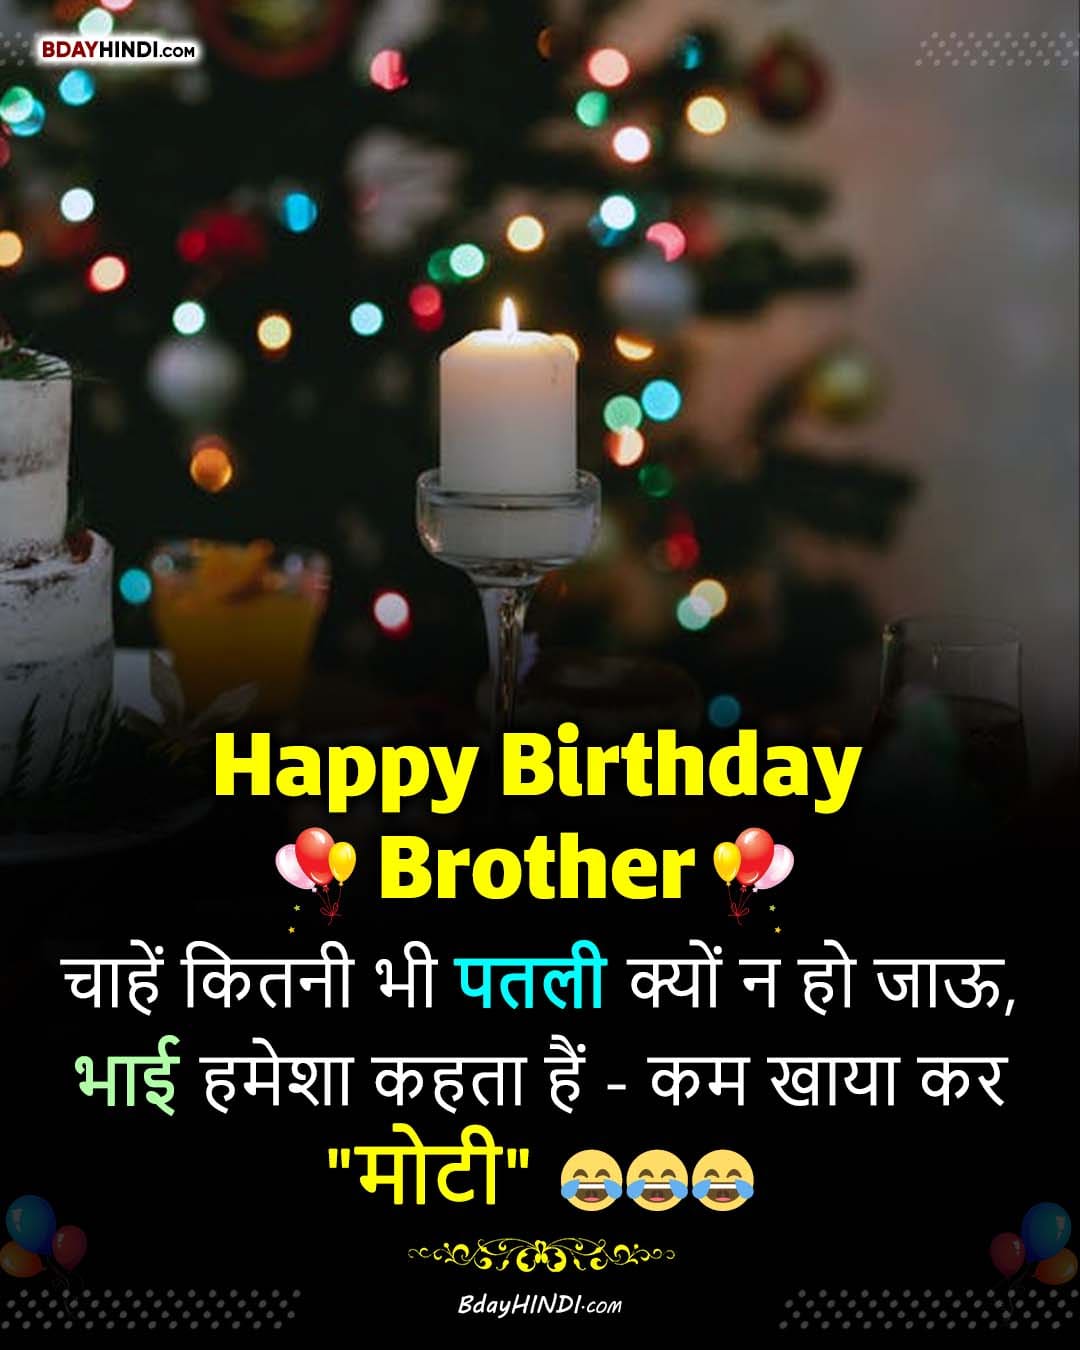 Birthday Wishes for Brother from Sister in Hindi